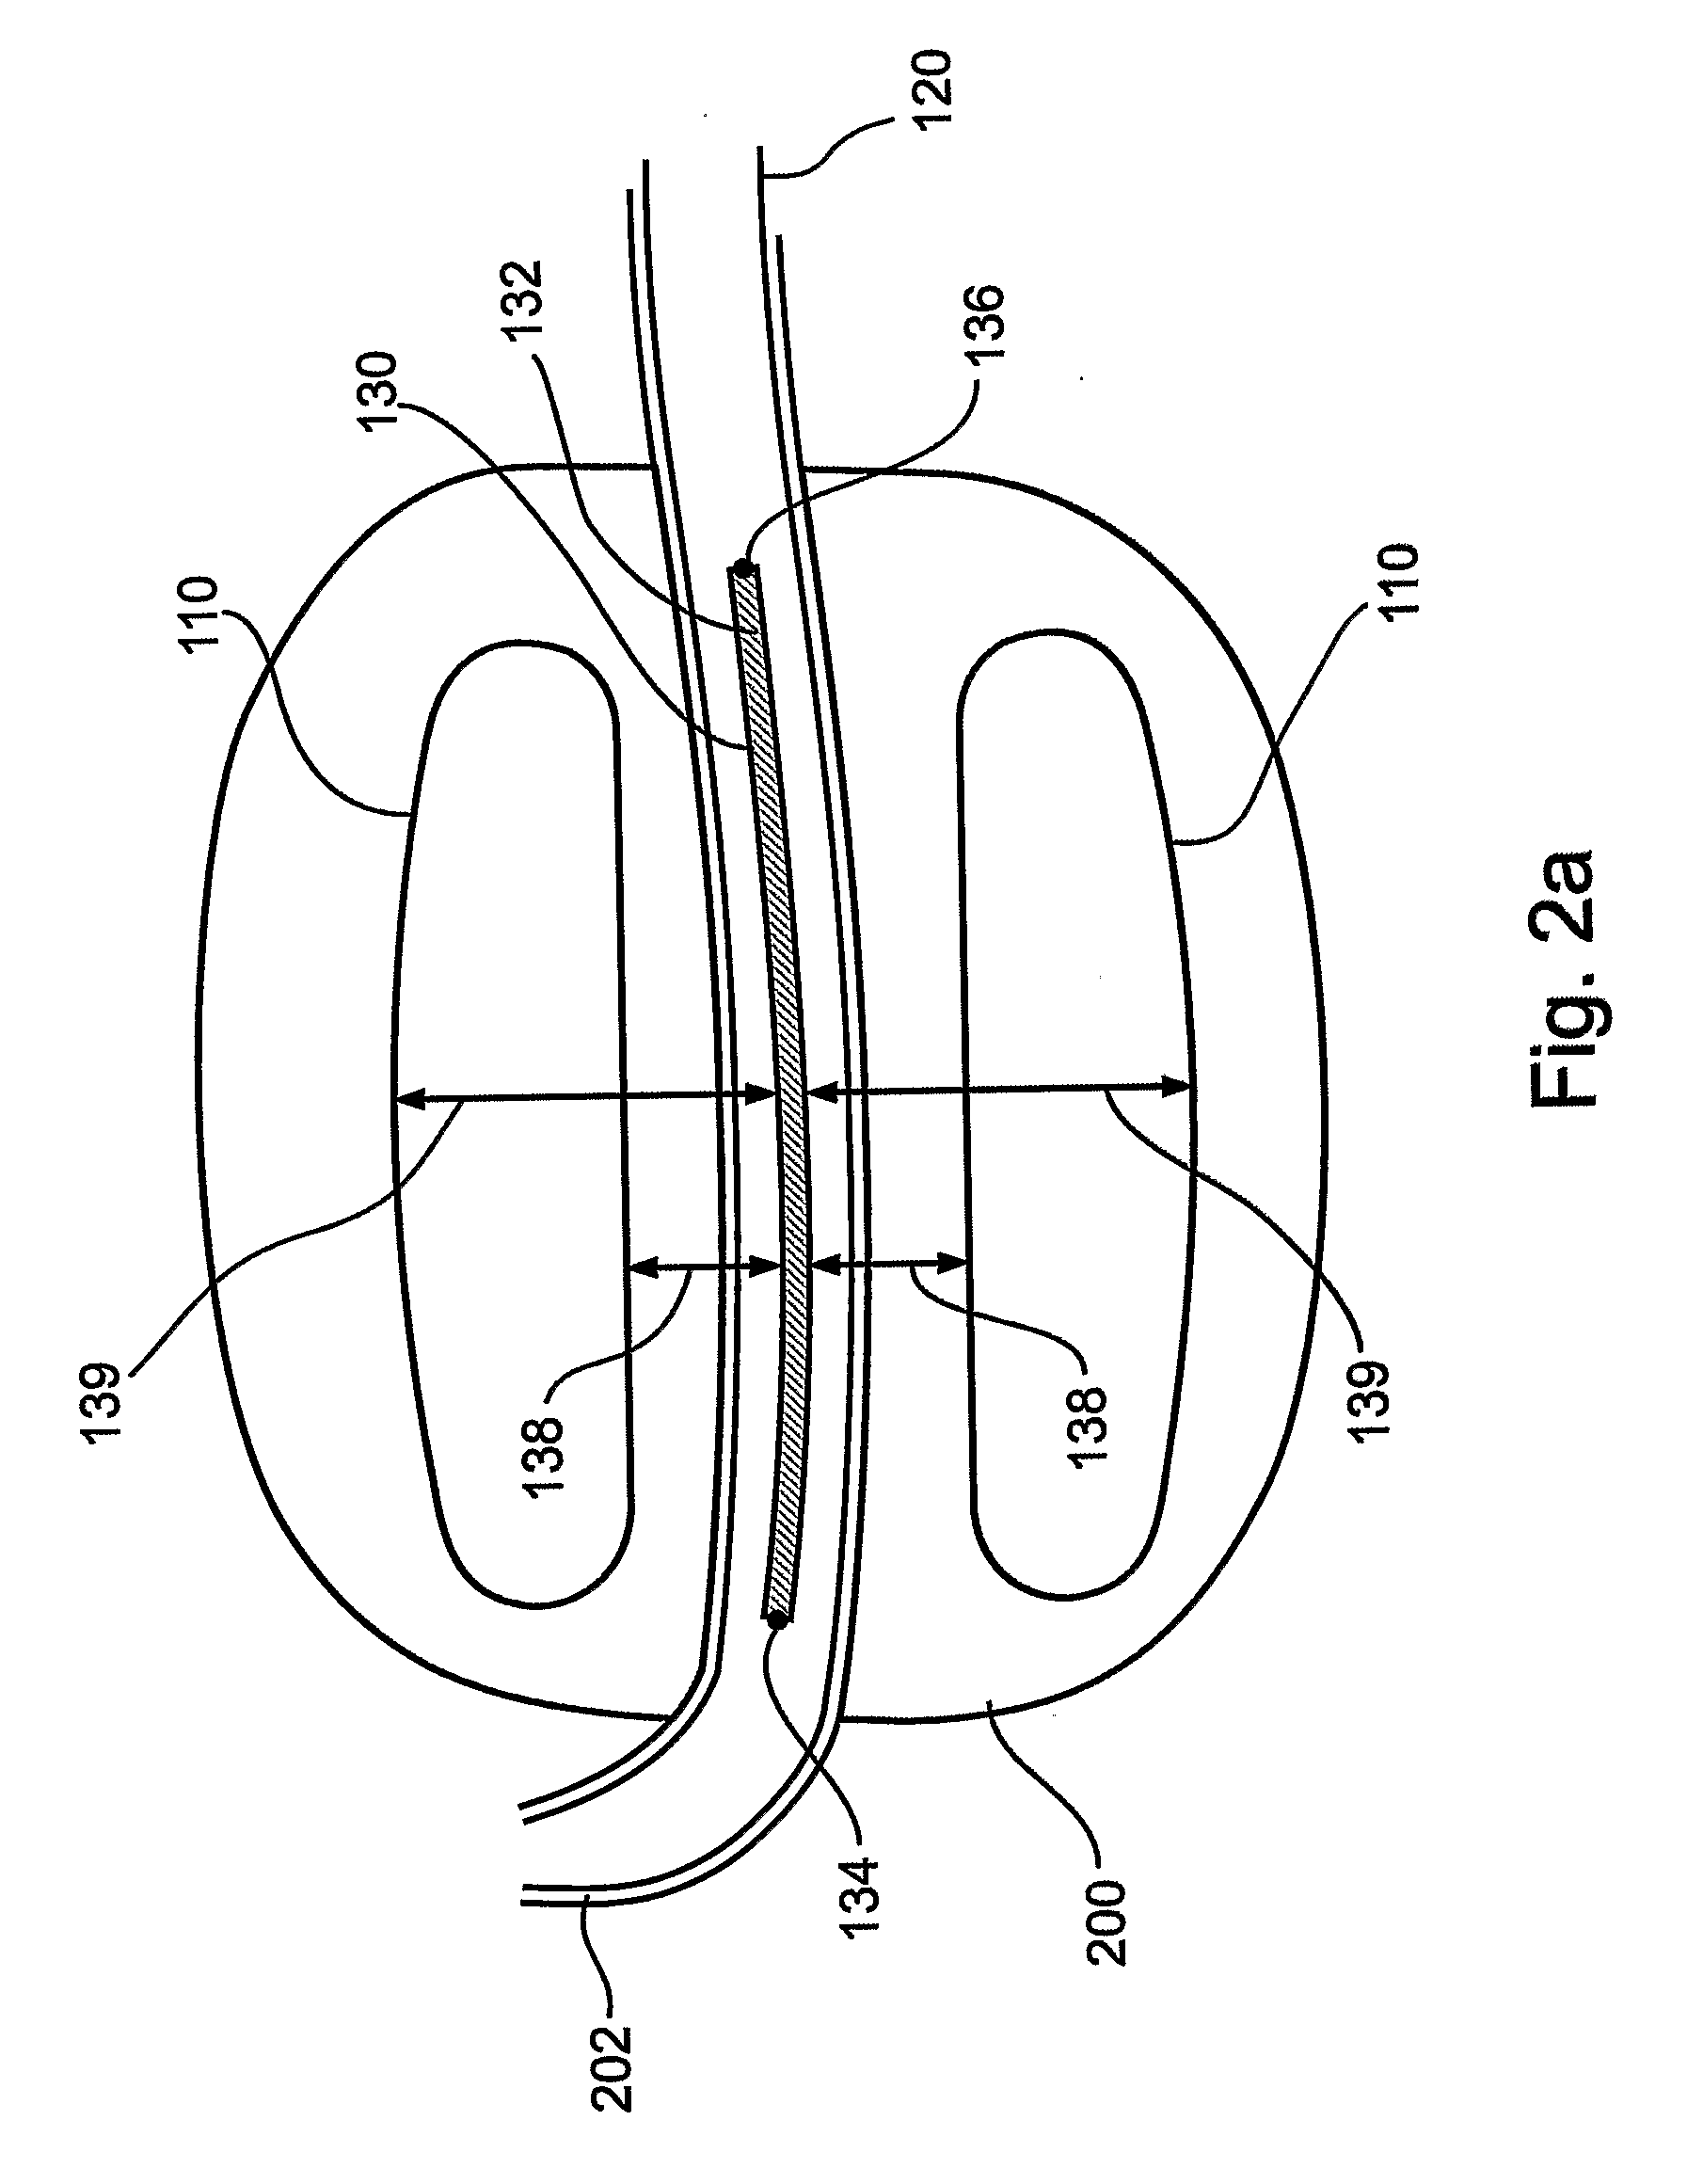 Method and Apparatus for Positioning a Medical Instrument